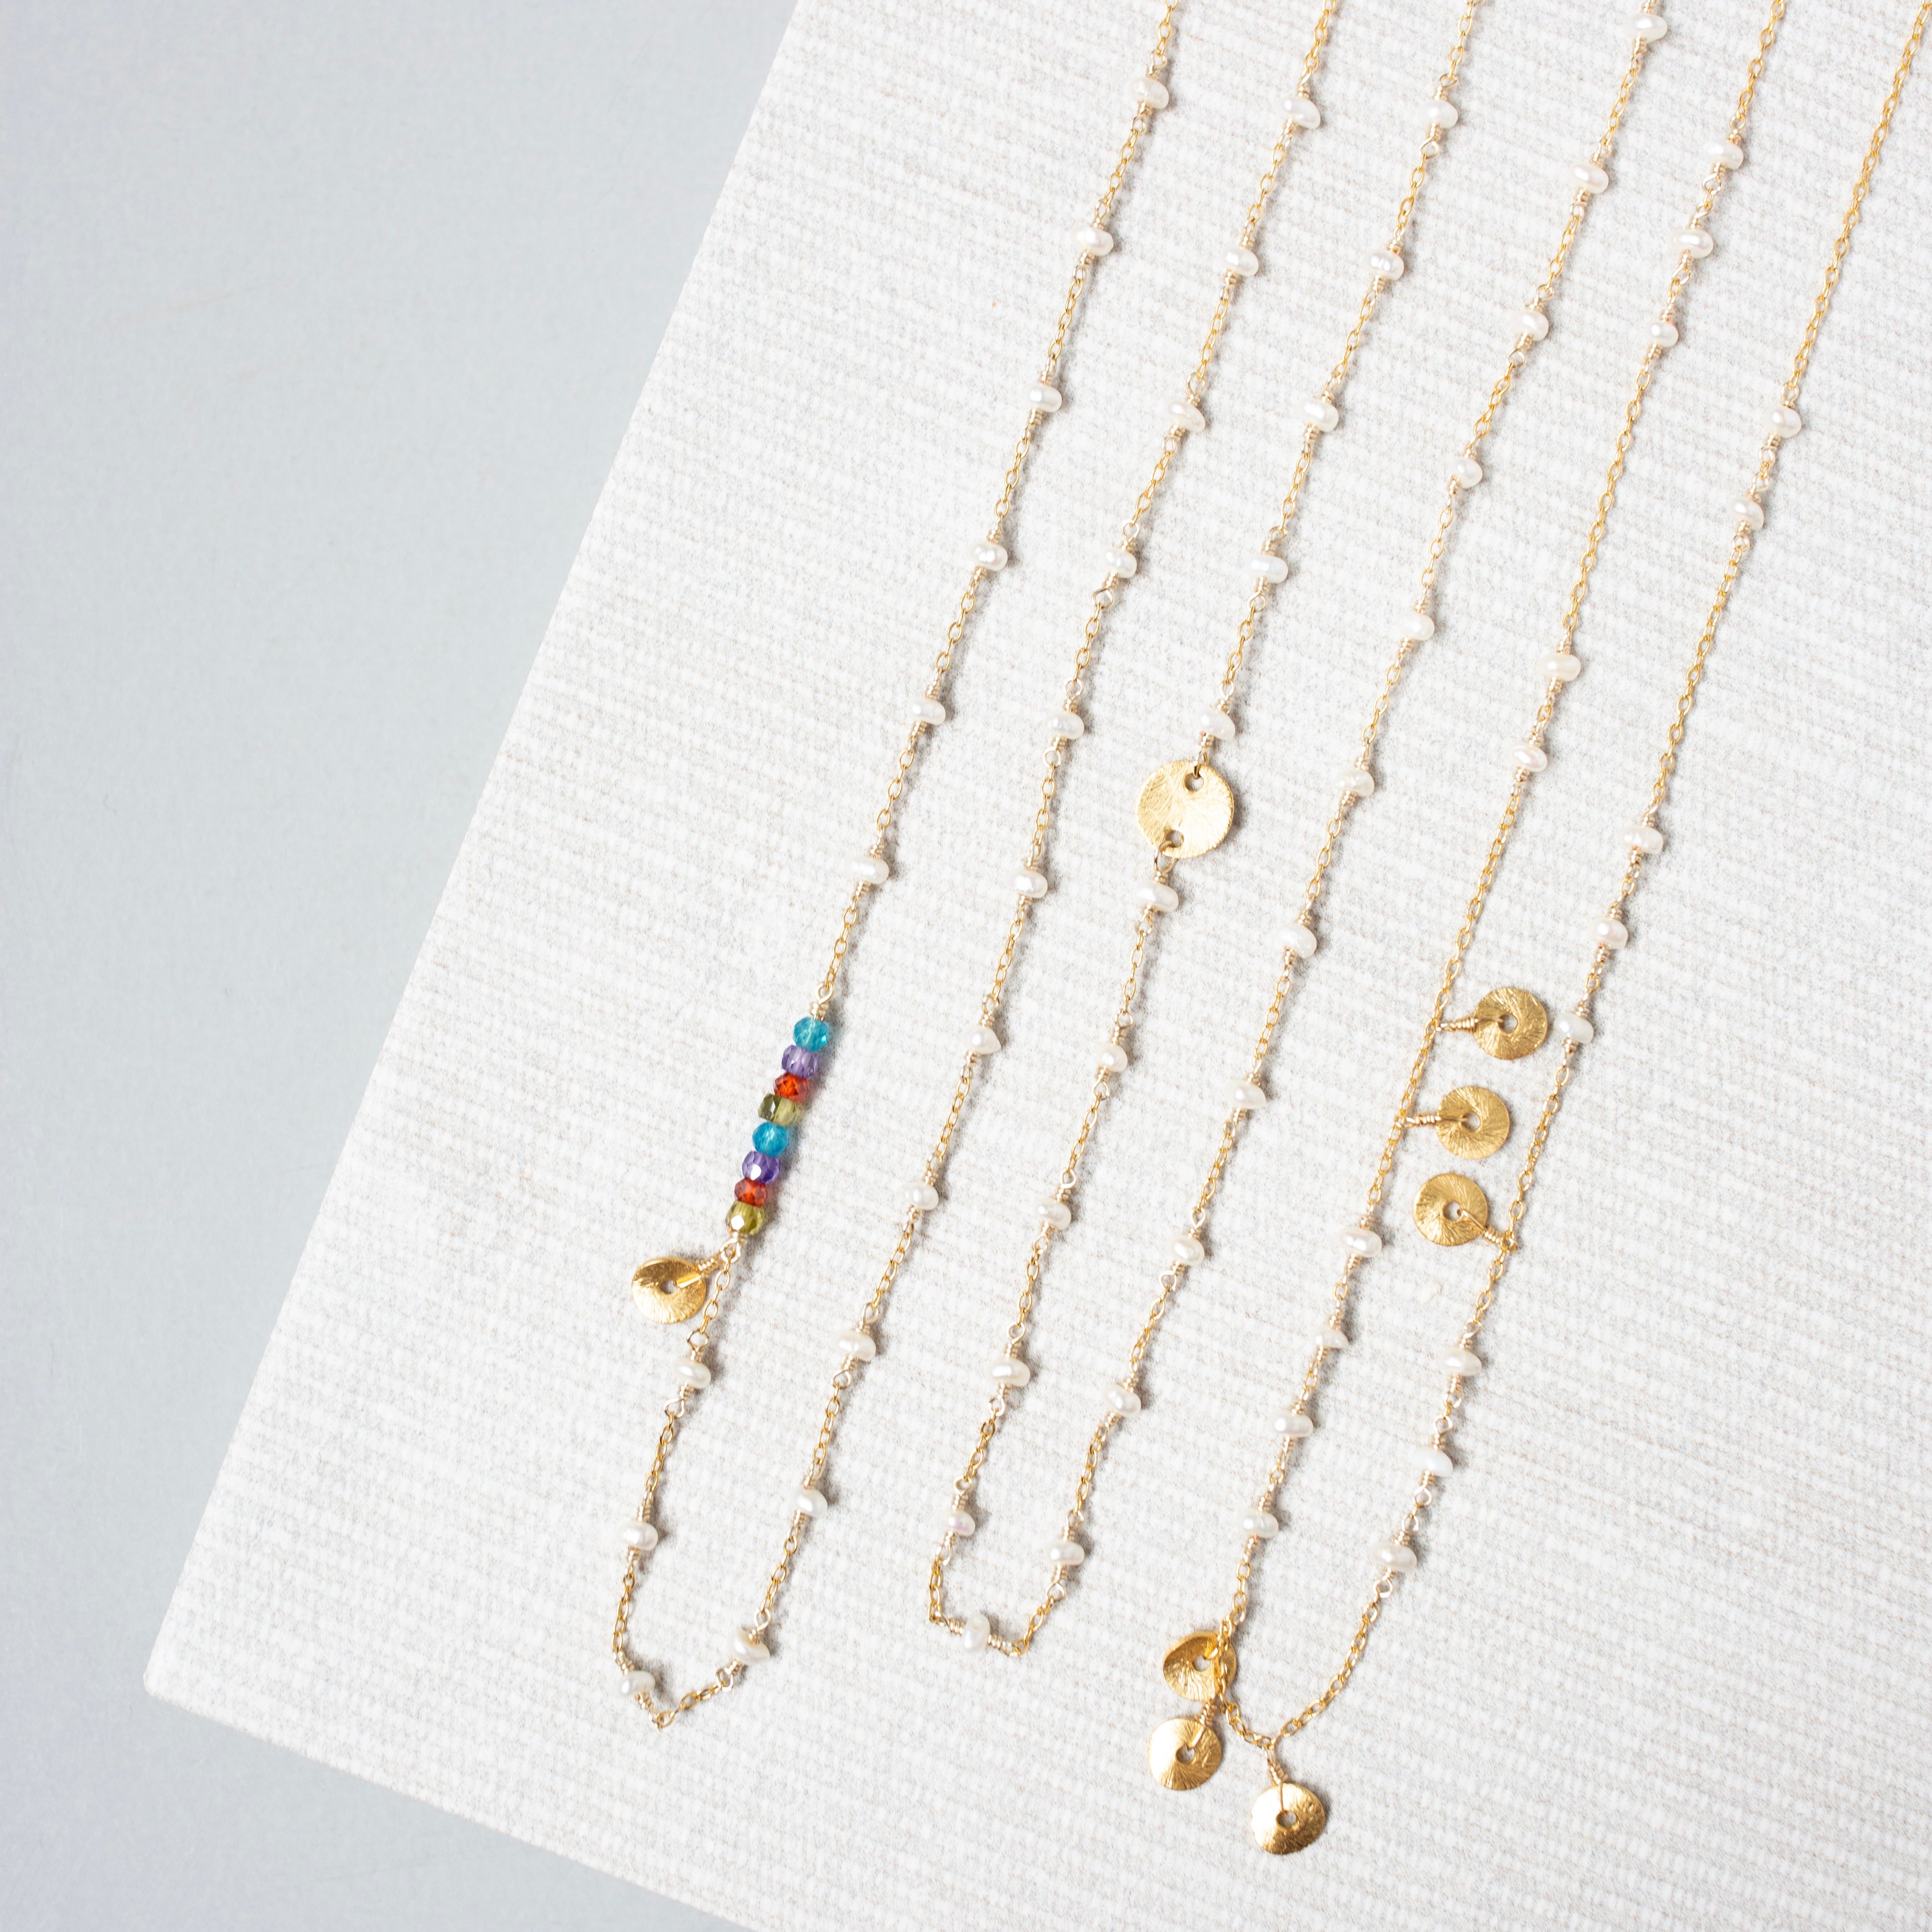 Gold Paloma Chain featuring Pearl stones Necklace 